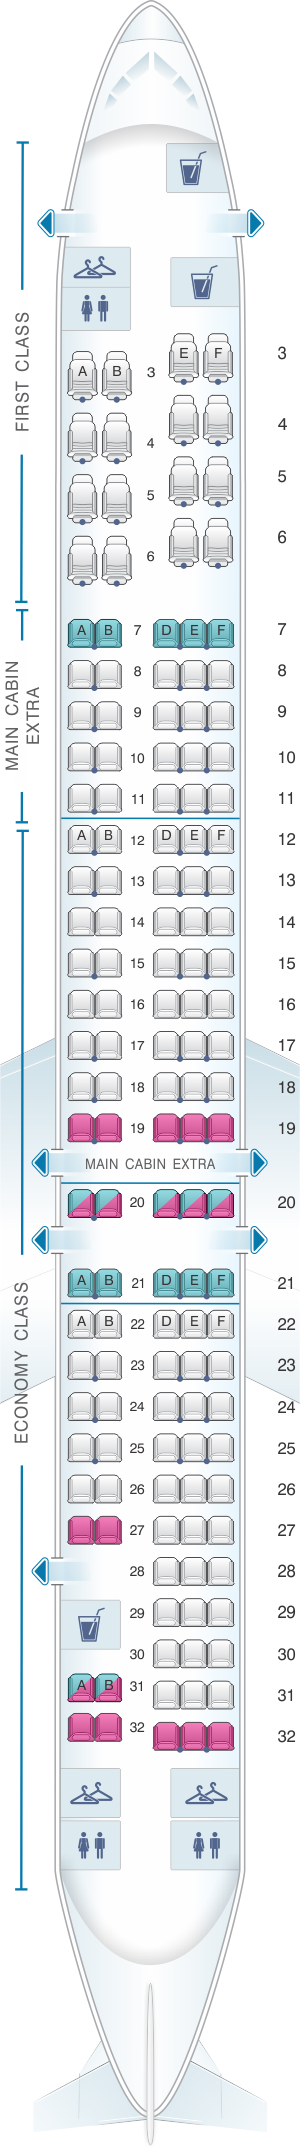 American Airlines Plane Seating Chart